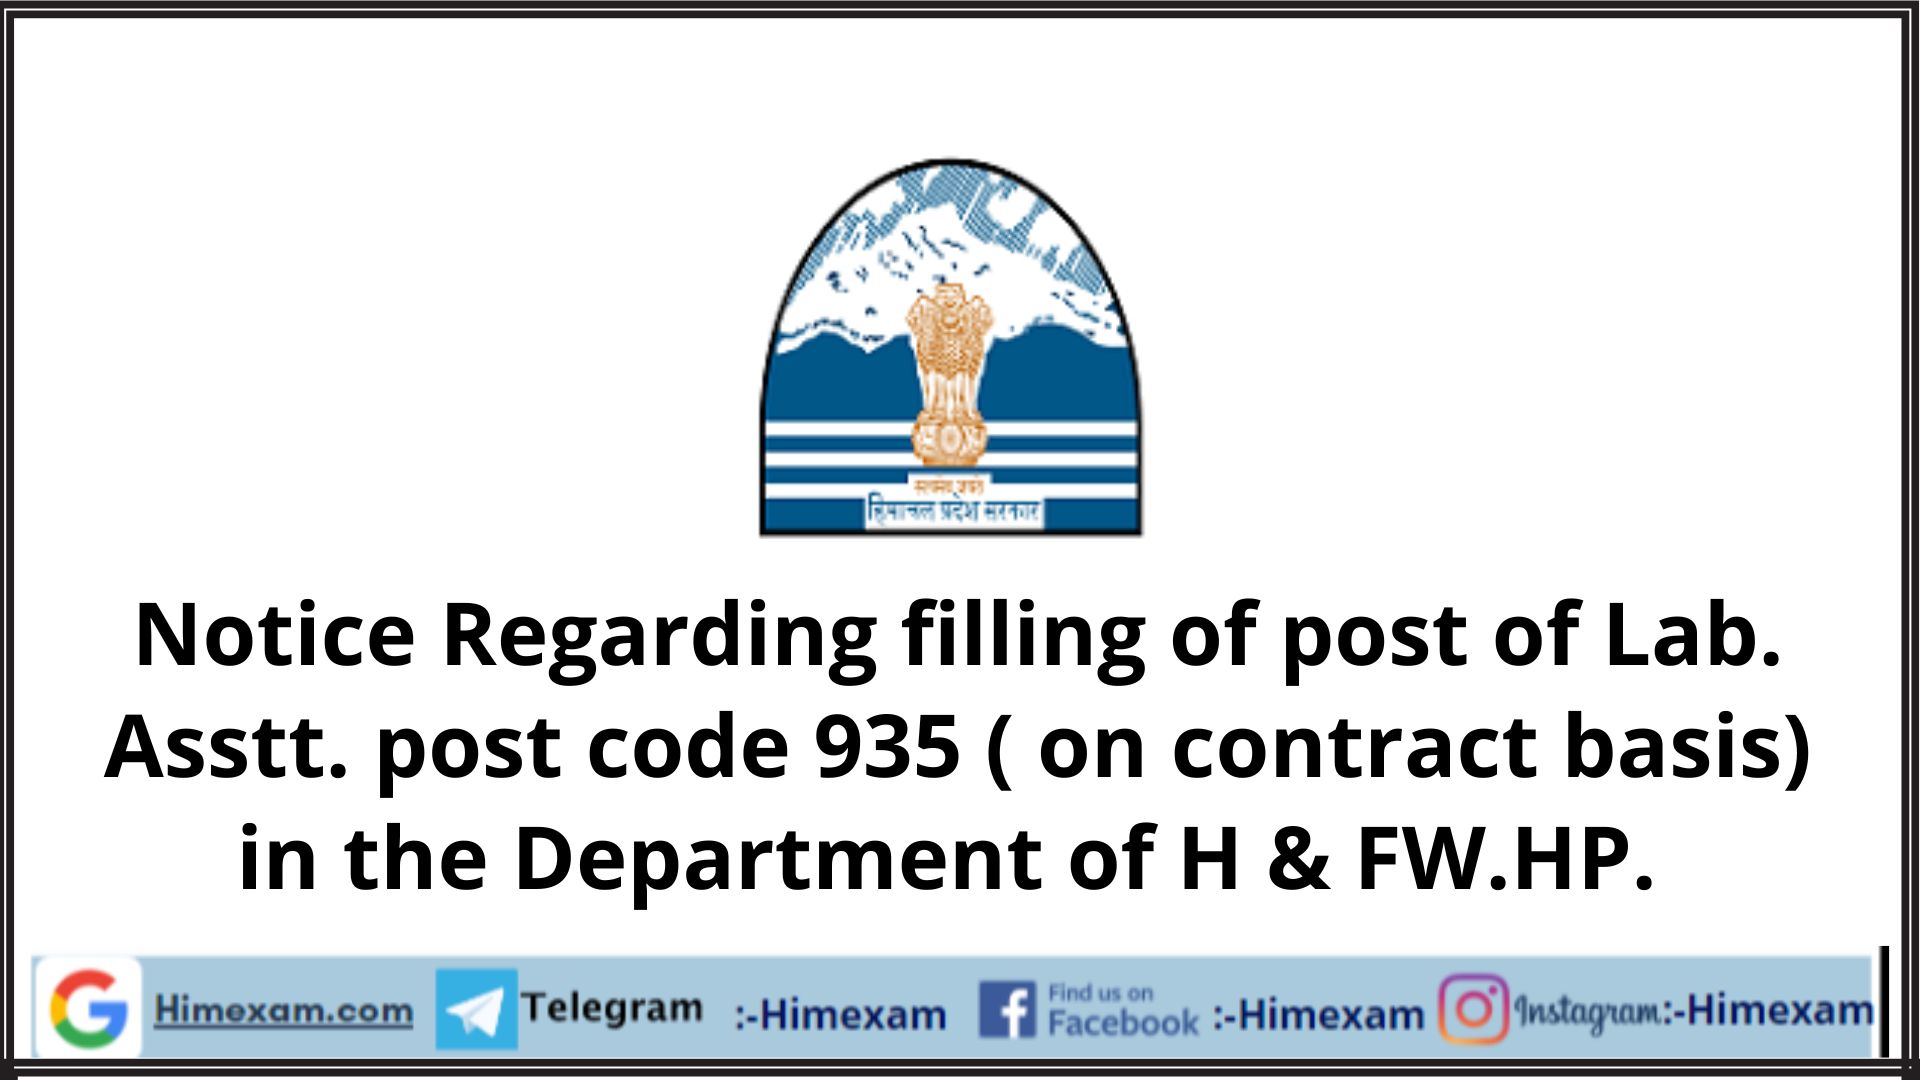 Notice Regarding filling of post of Lab. Asstt. post code 935 ( on contract basis) in the Department of H & FW.HP.